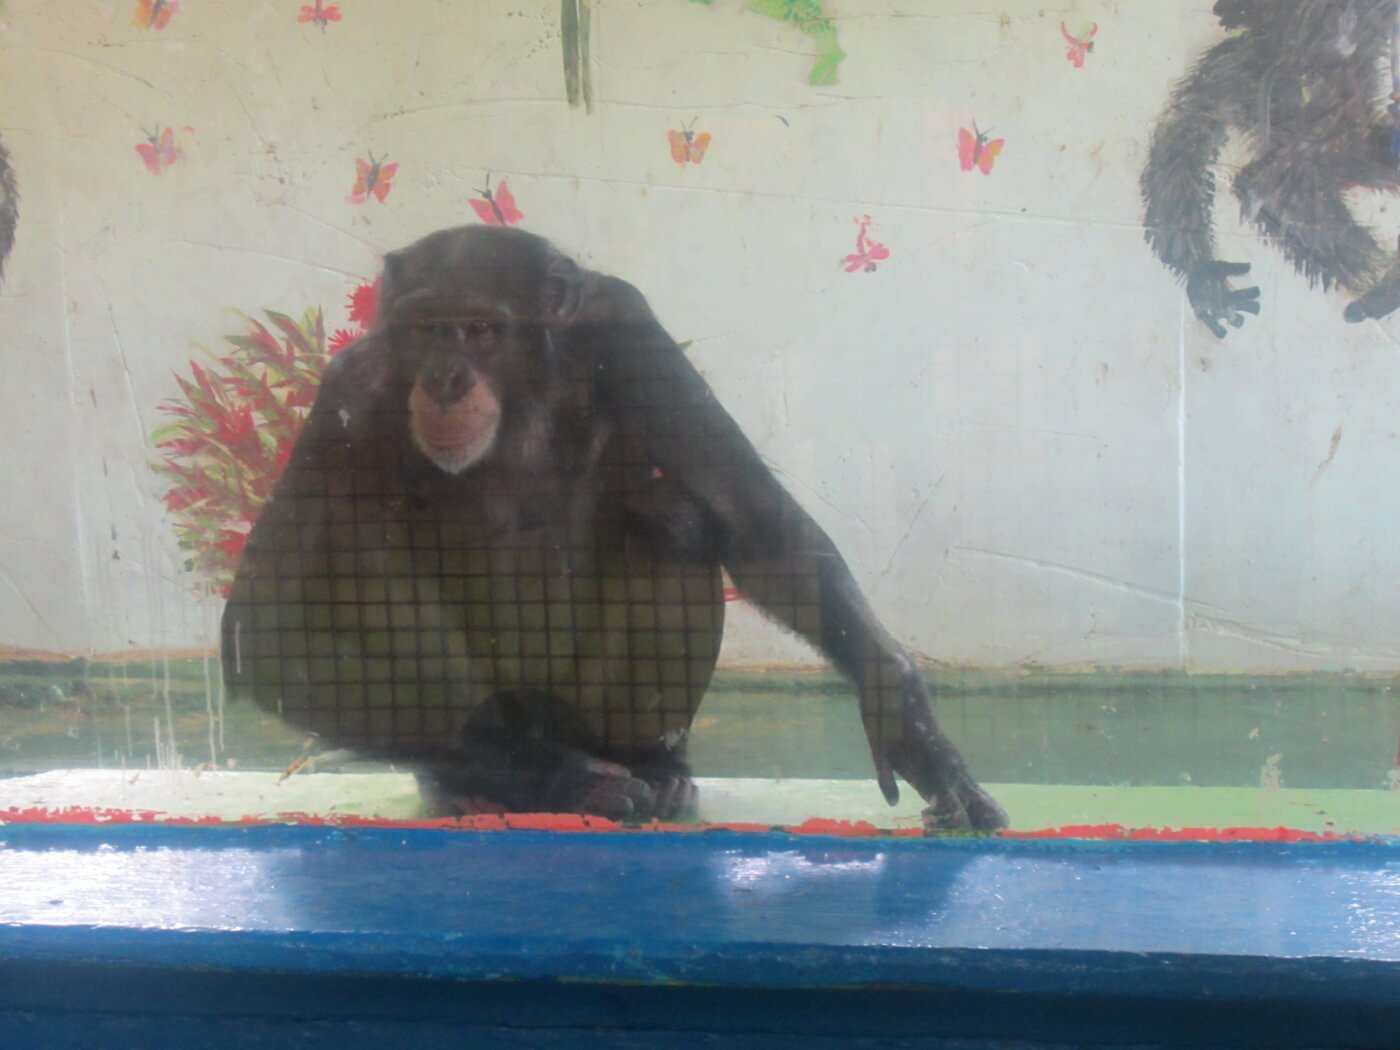 doc antle associate andrew sawyer arrested chimpanzee joey ordered sanctuary